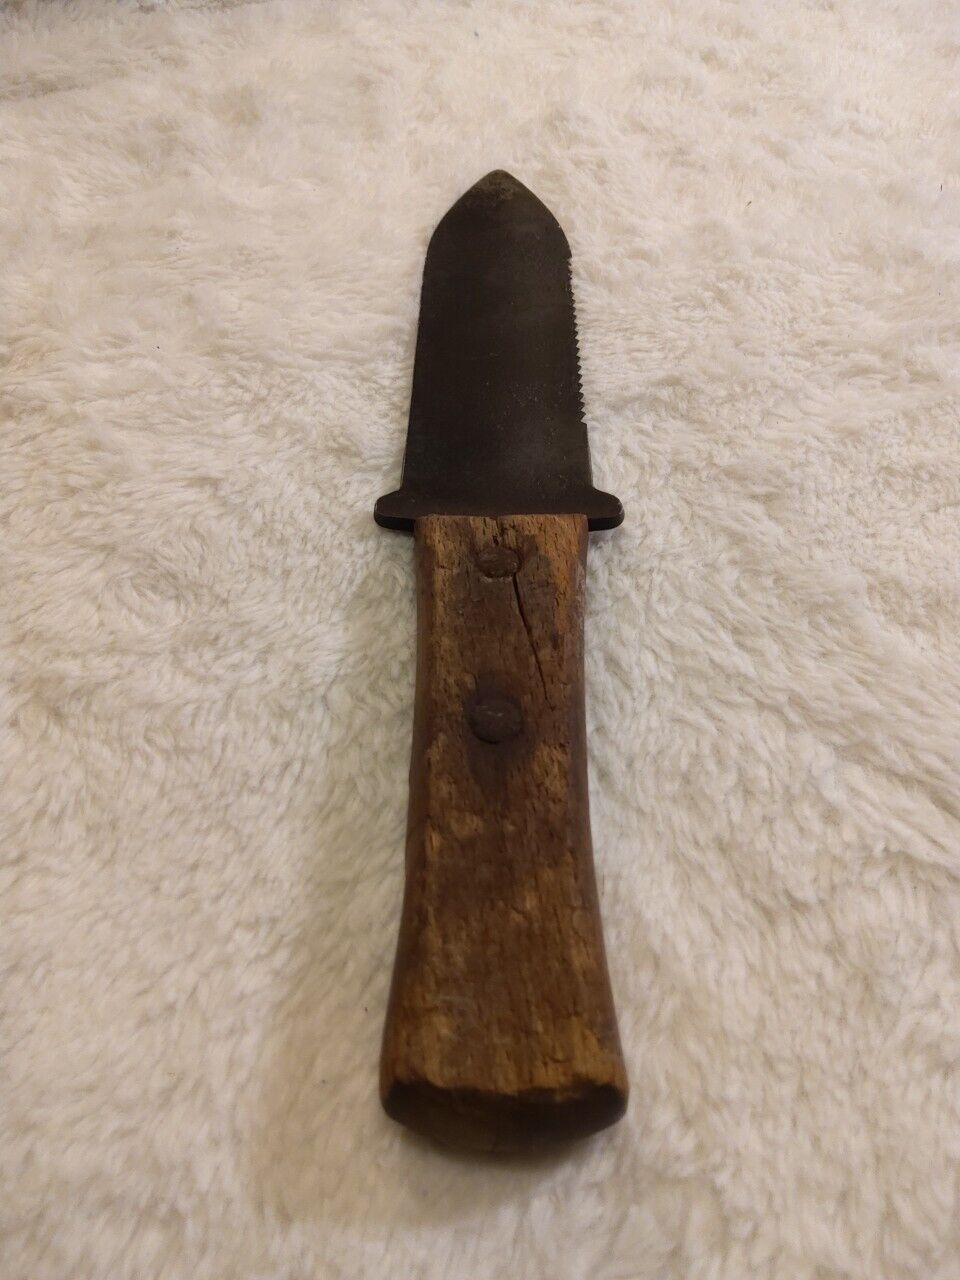 Vintage Hori Hori Knife With The Wood Handle